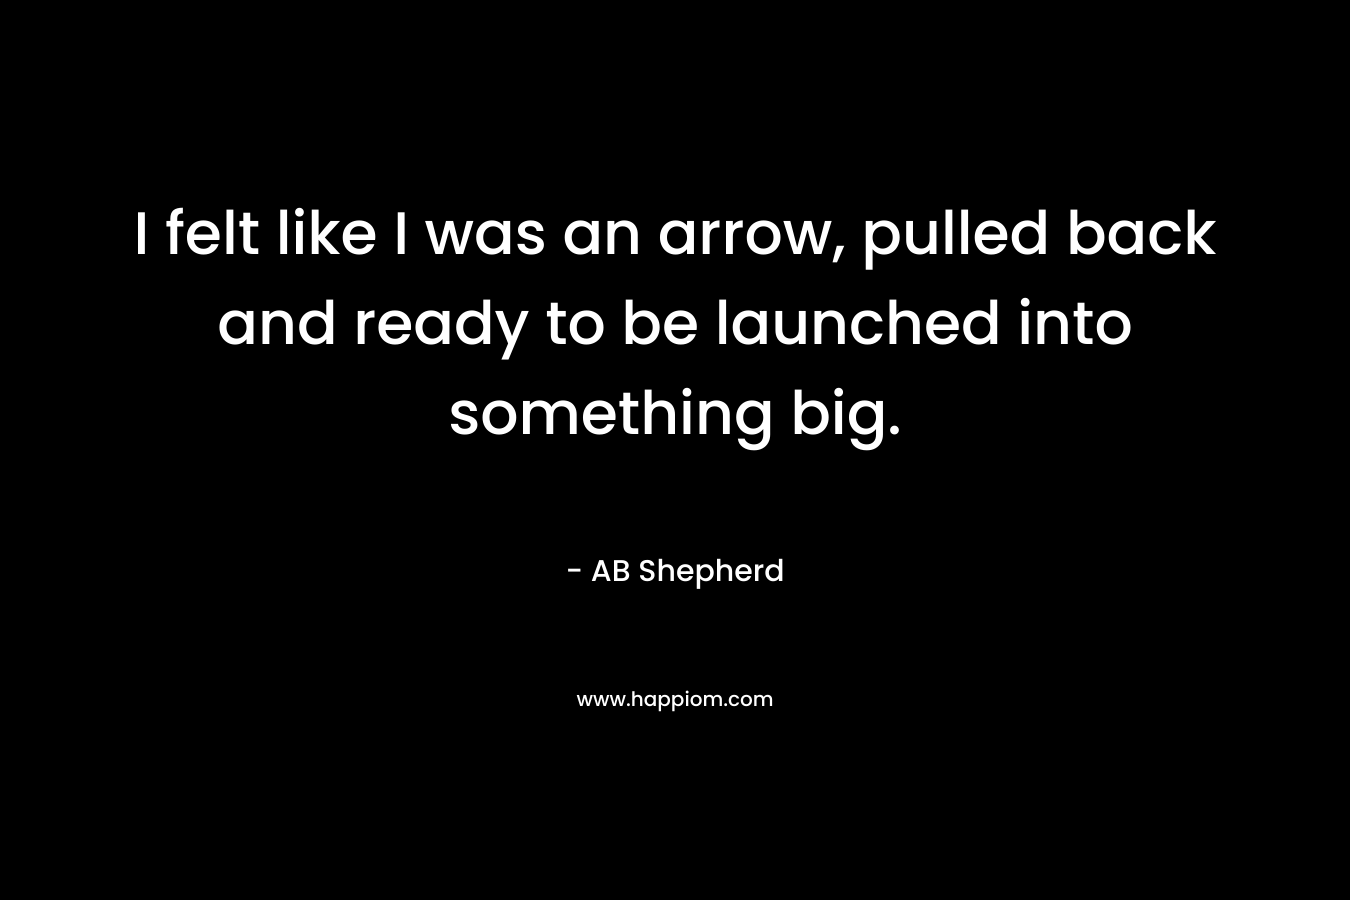 I felt like I was an arrow, pulled back and ready to be launched into something big. – AB Shepherd